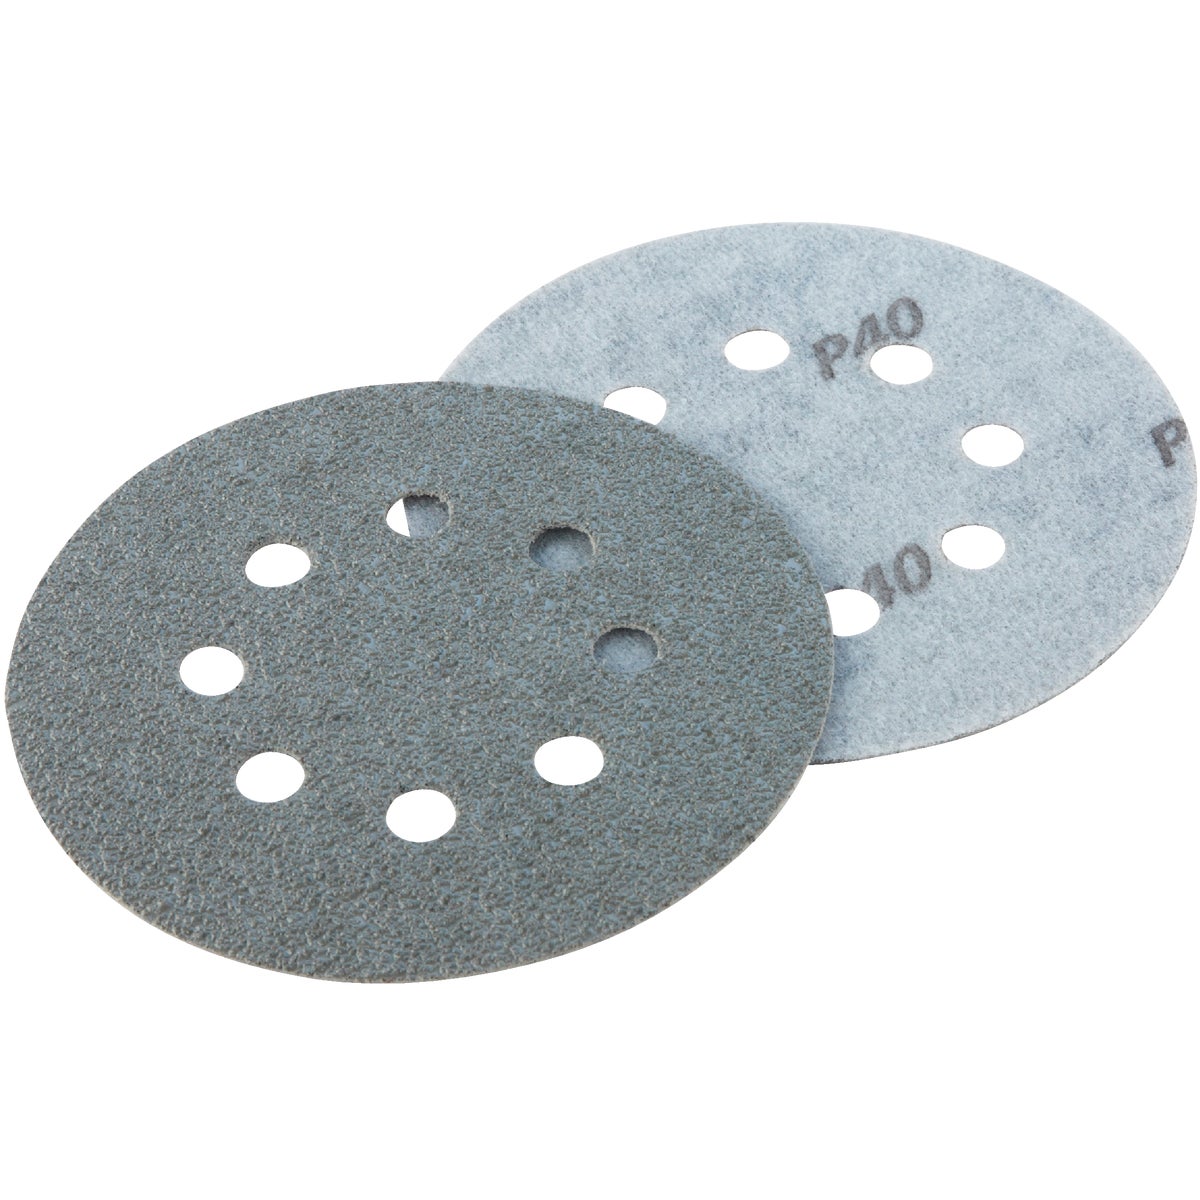 Gator 5 In. 40-Grit 8-Hole Pattern Vented Sanding Disc with Hook & Loop Backing (3-Pack)